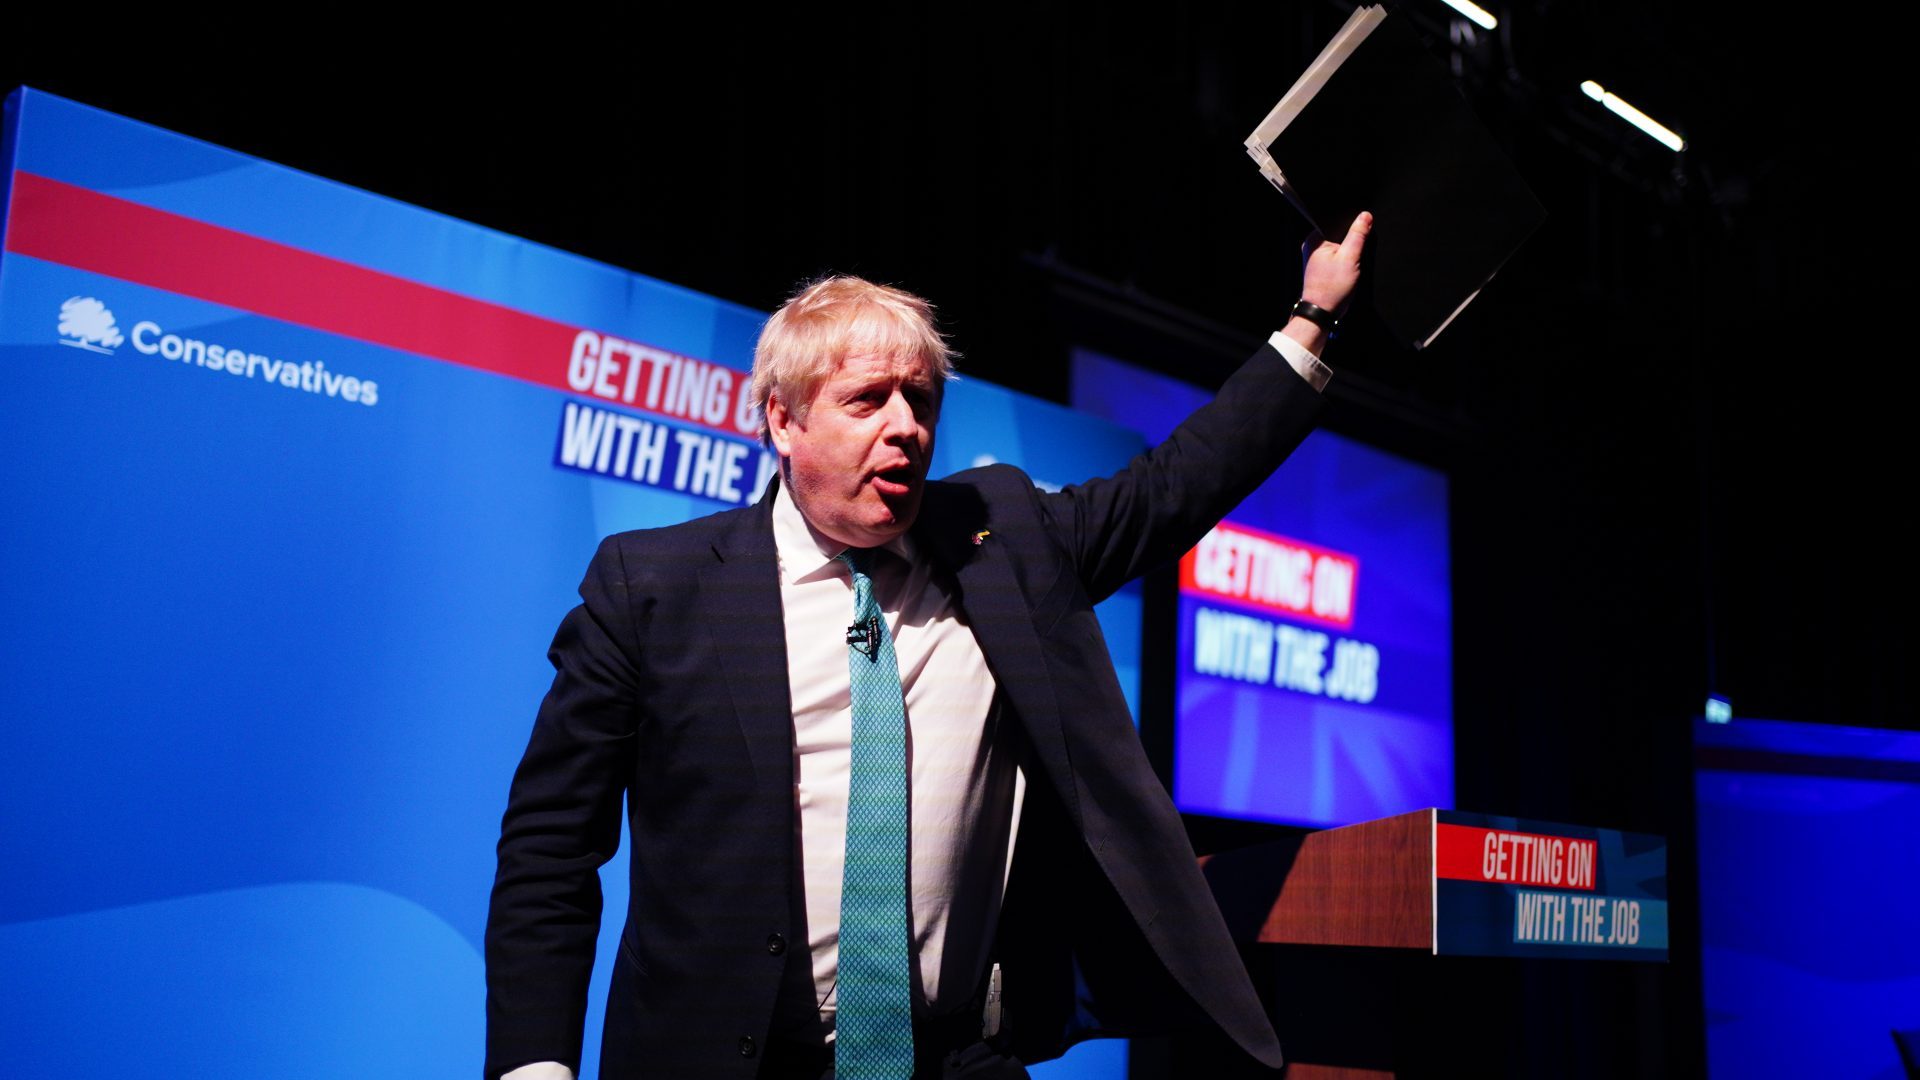 Boris Johnson acknowledges his supporters after speaking at the Conservative Party Spring Forum. Photo: PA